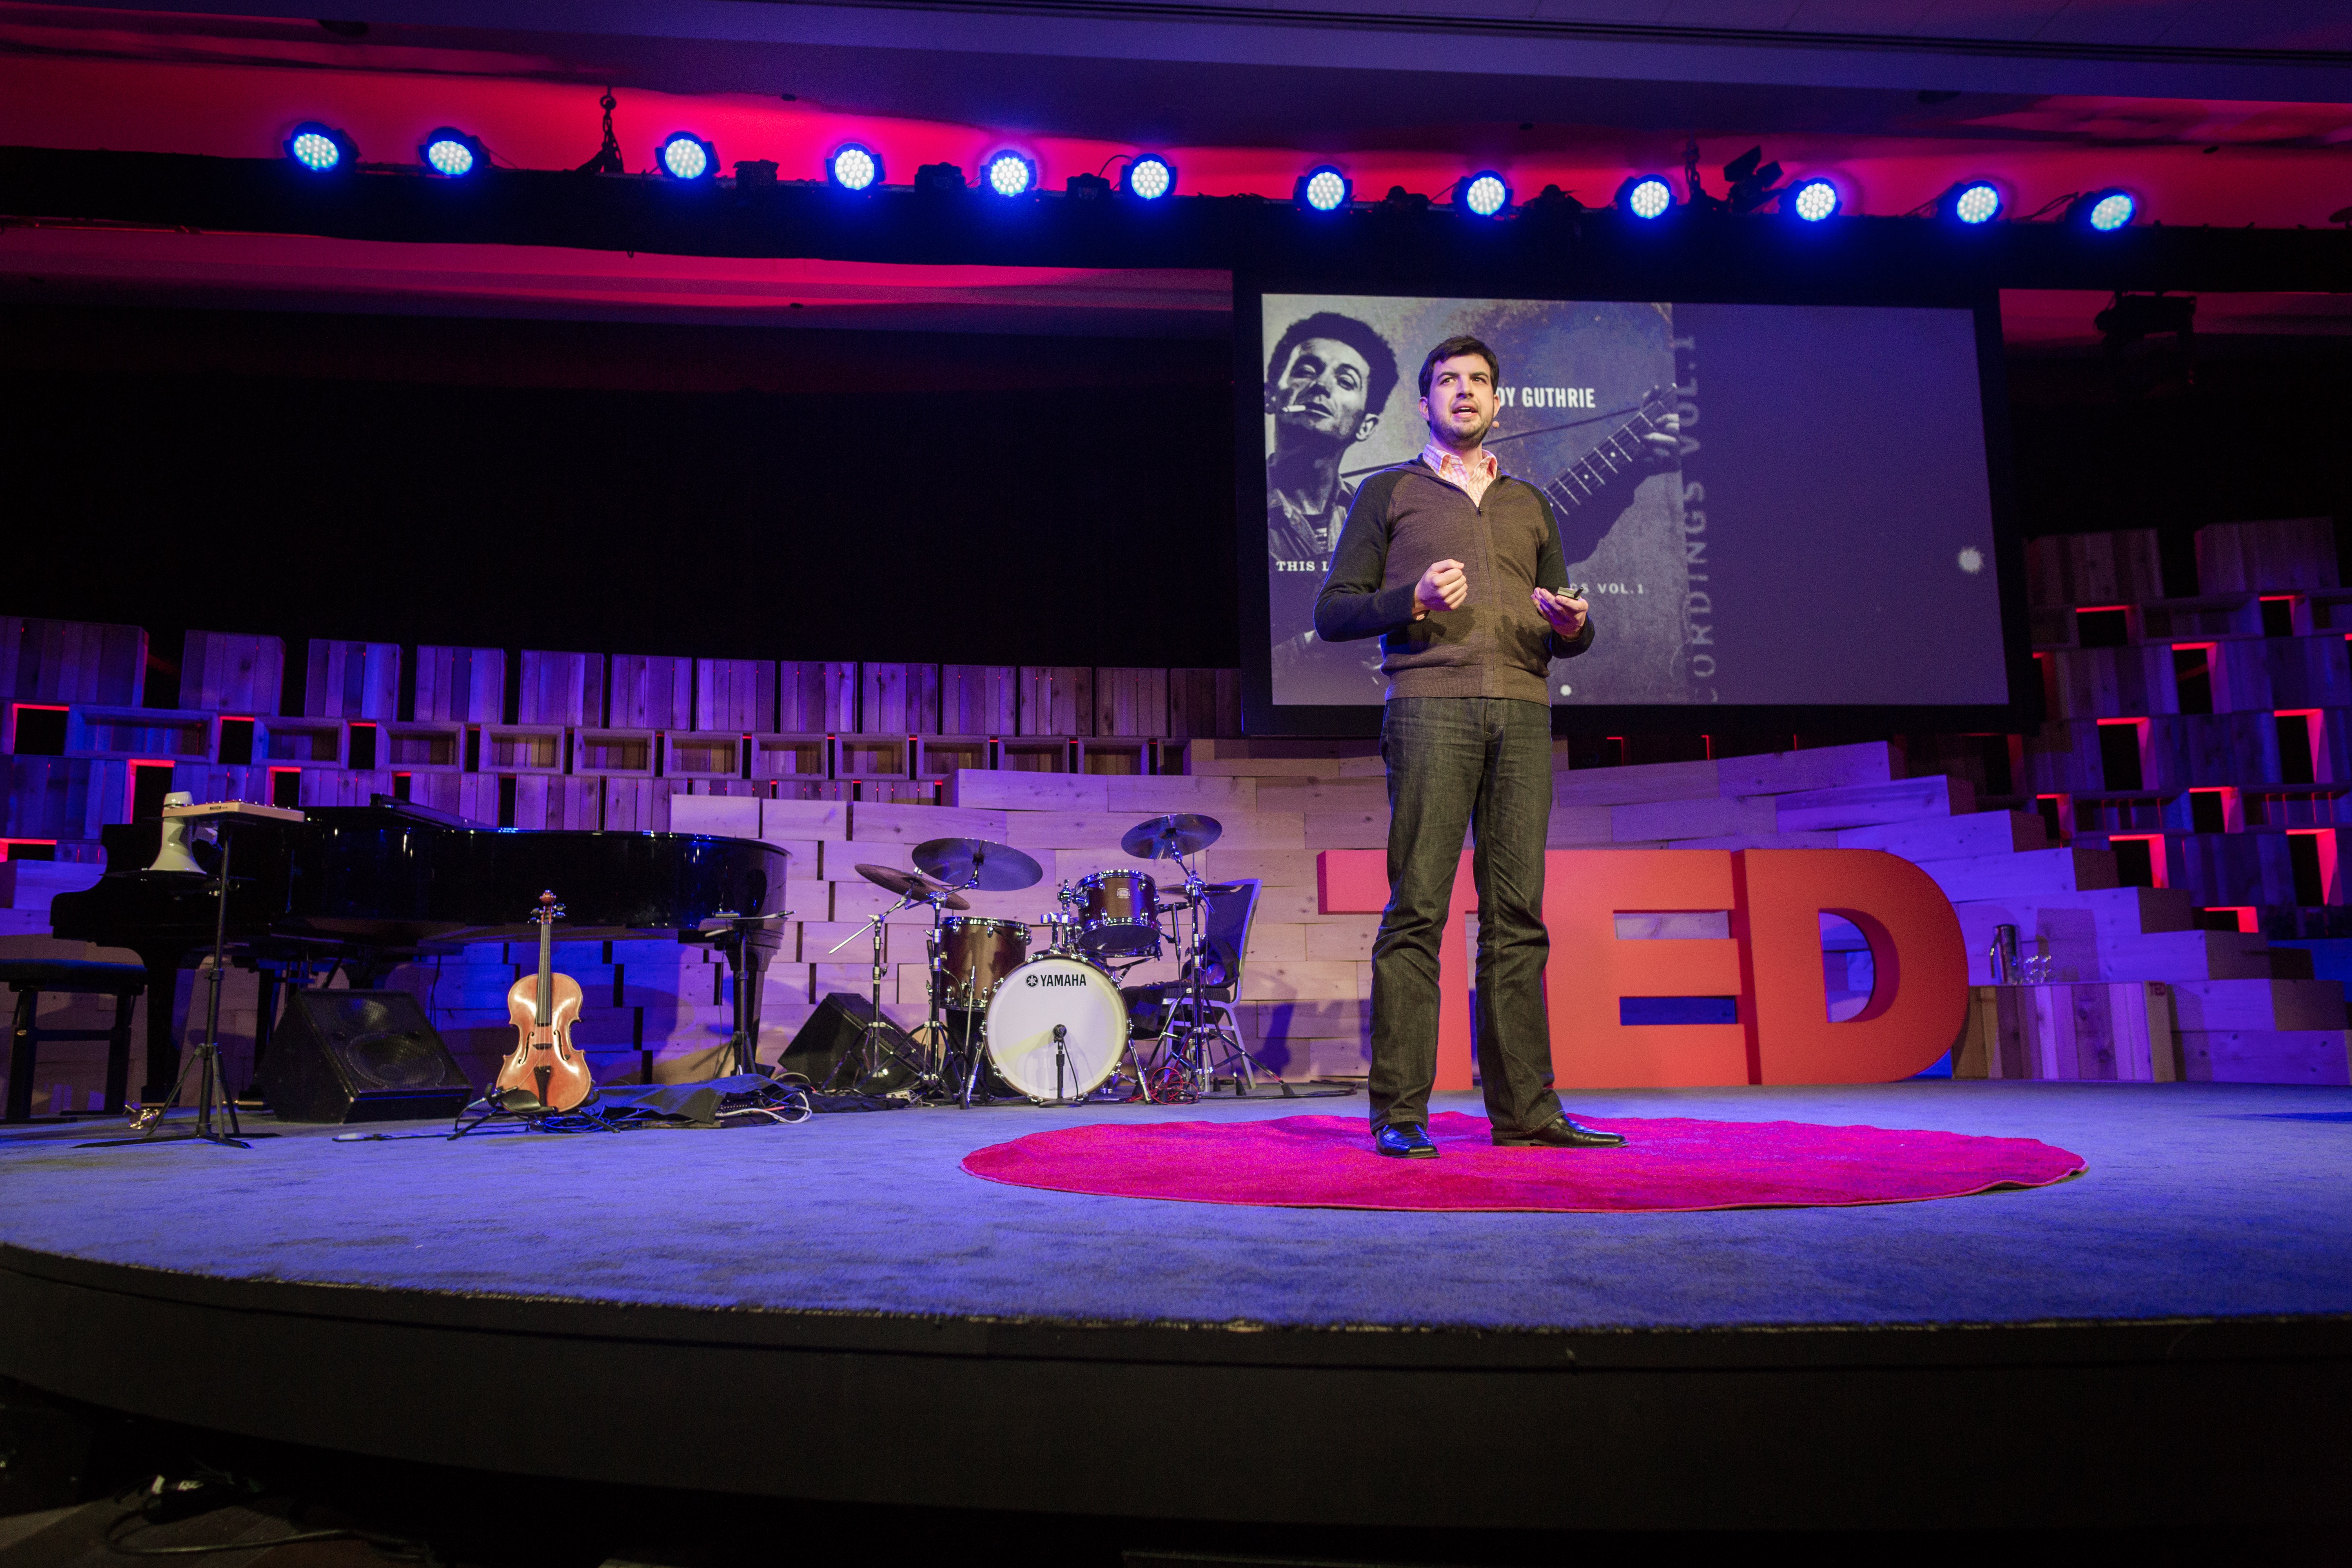 Dan Visconti named a 2014 TED Fellow and will deliver a TED talk at the March 2014 conference in Vancouver, BC.